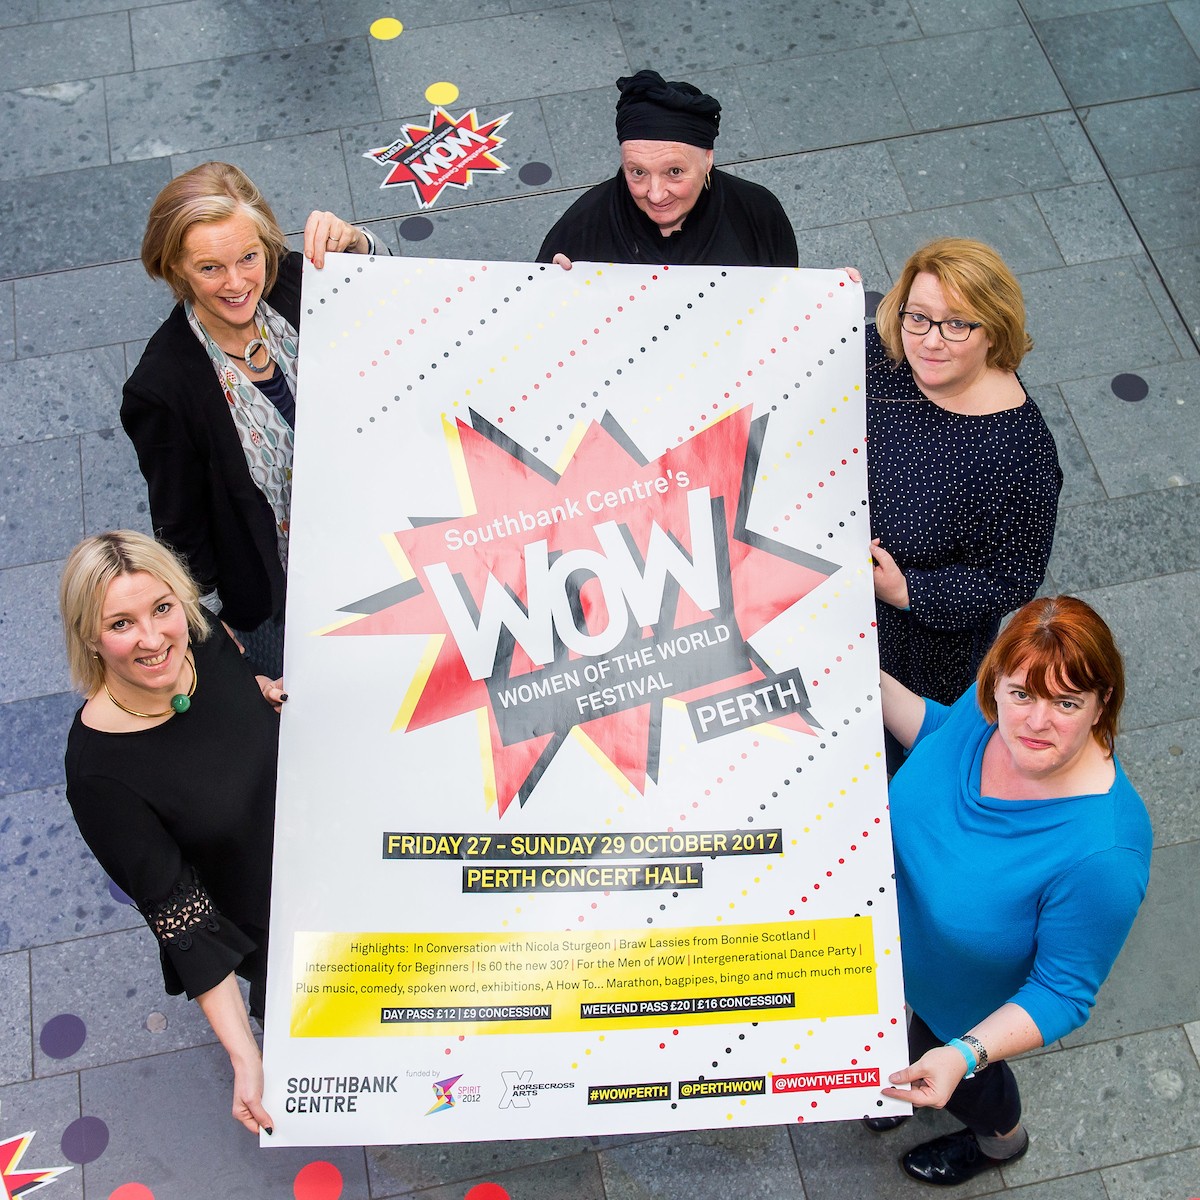 Get involved in shaping this year's Women of the World Festival by taking part in the WOW Thinkins!